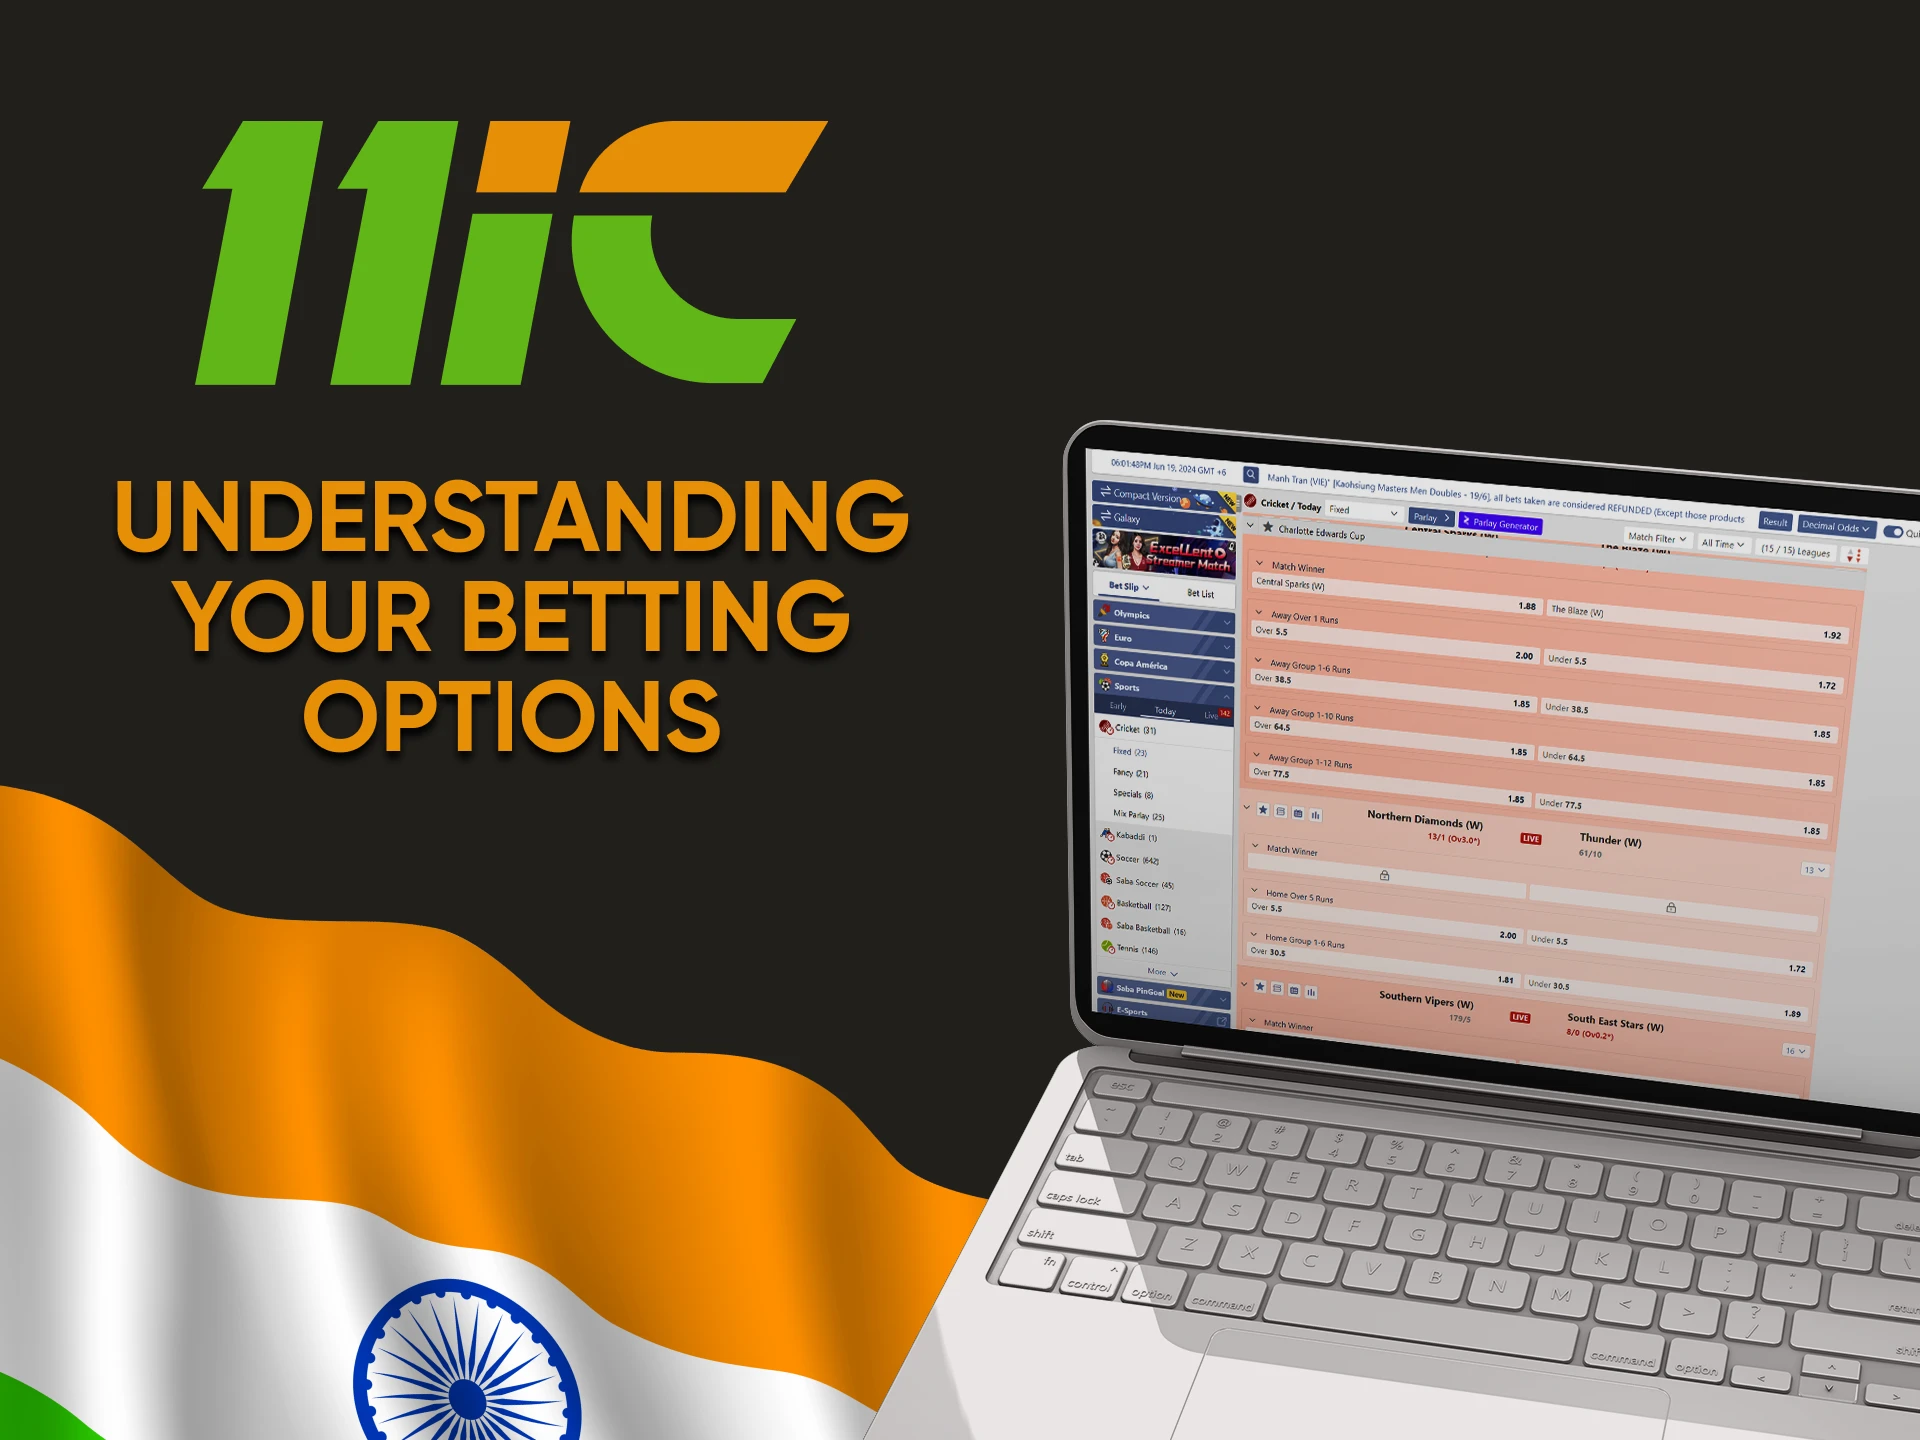 Explore sports and betting options on 11ic.